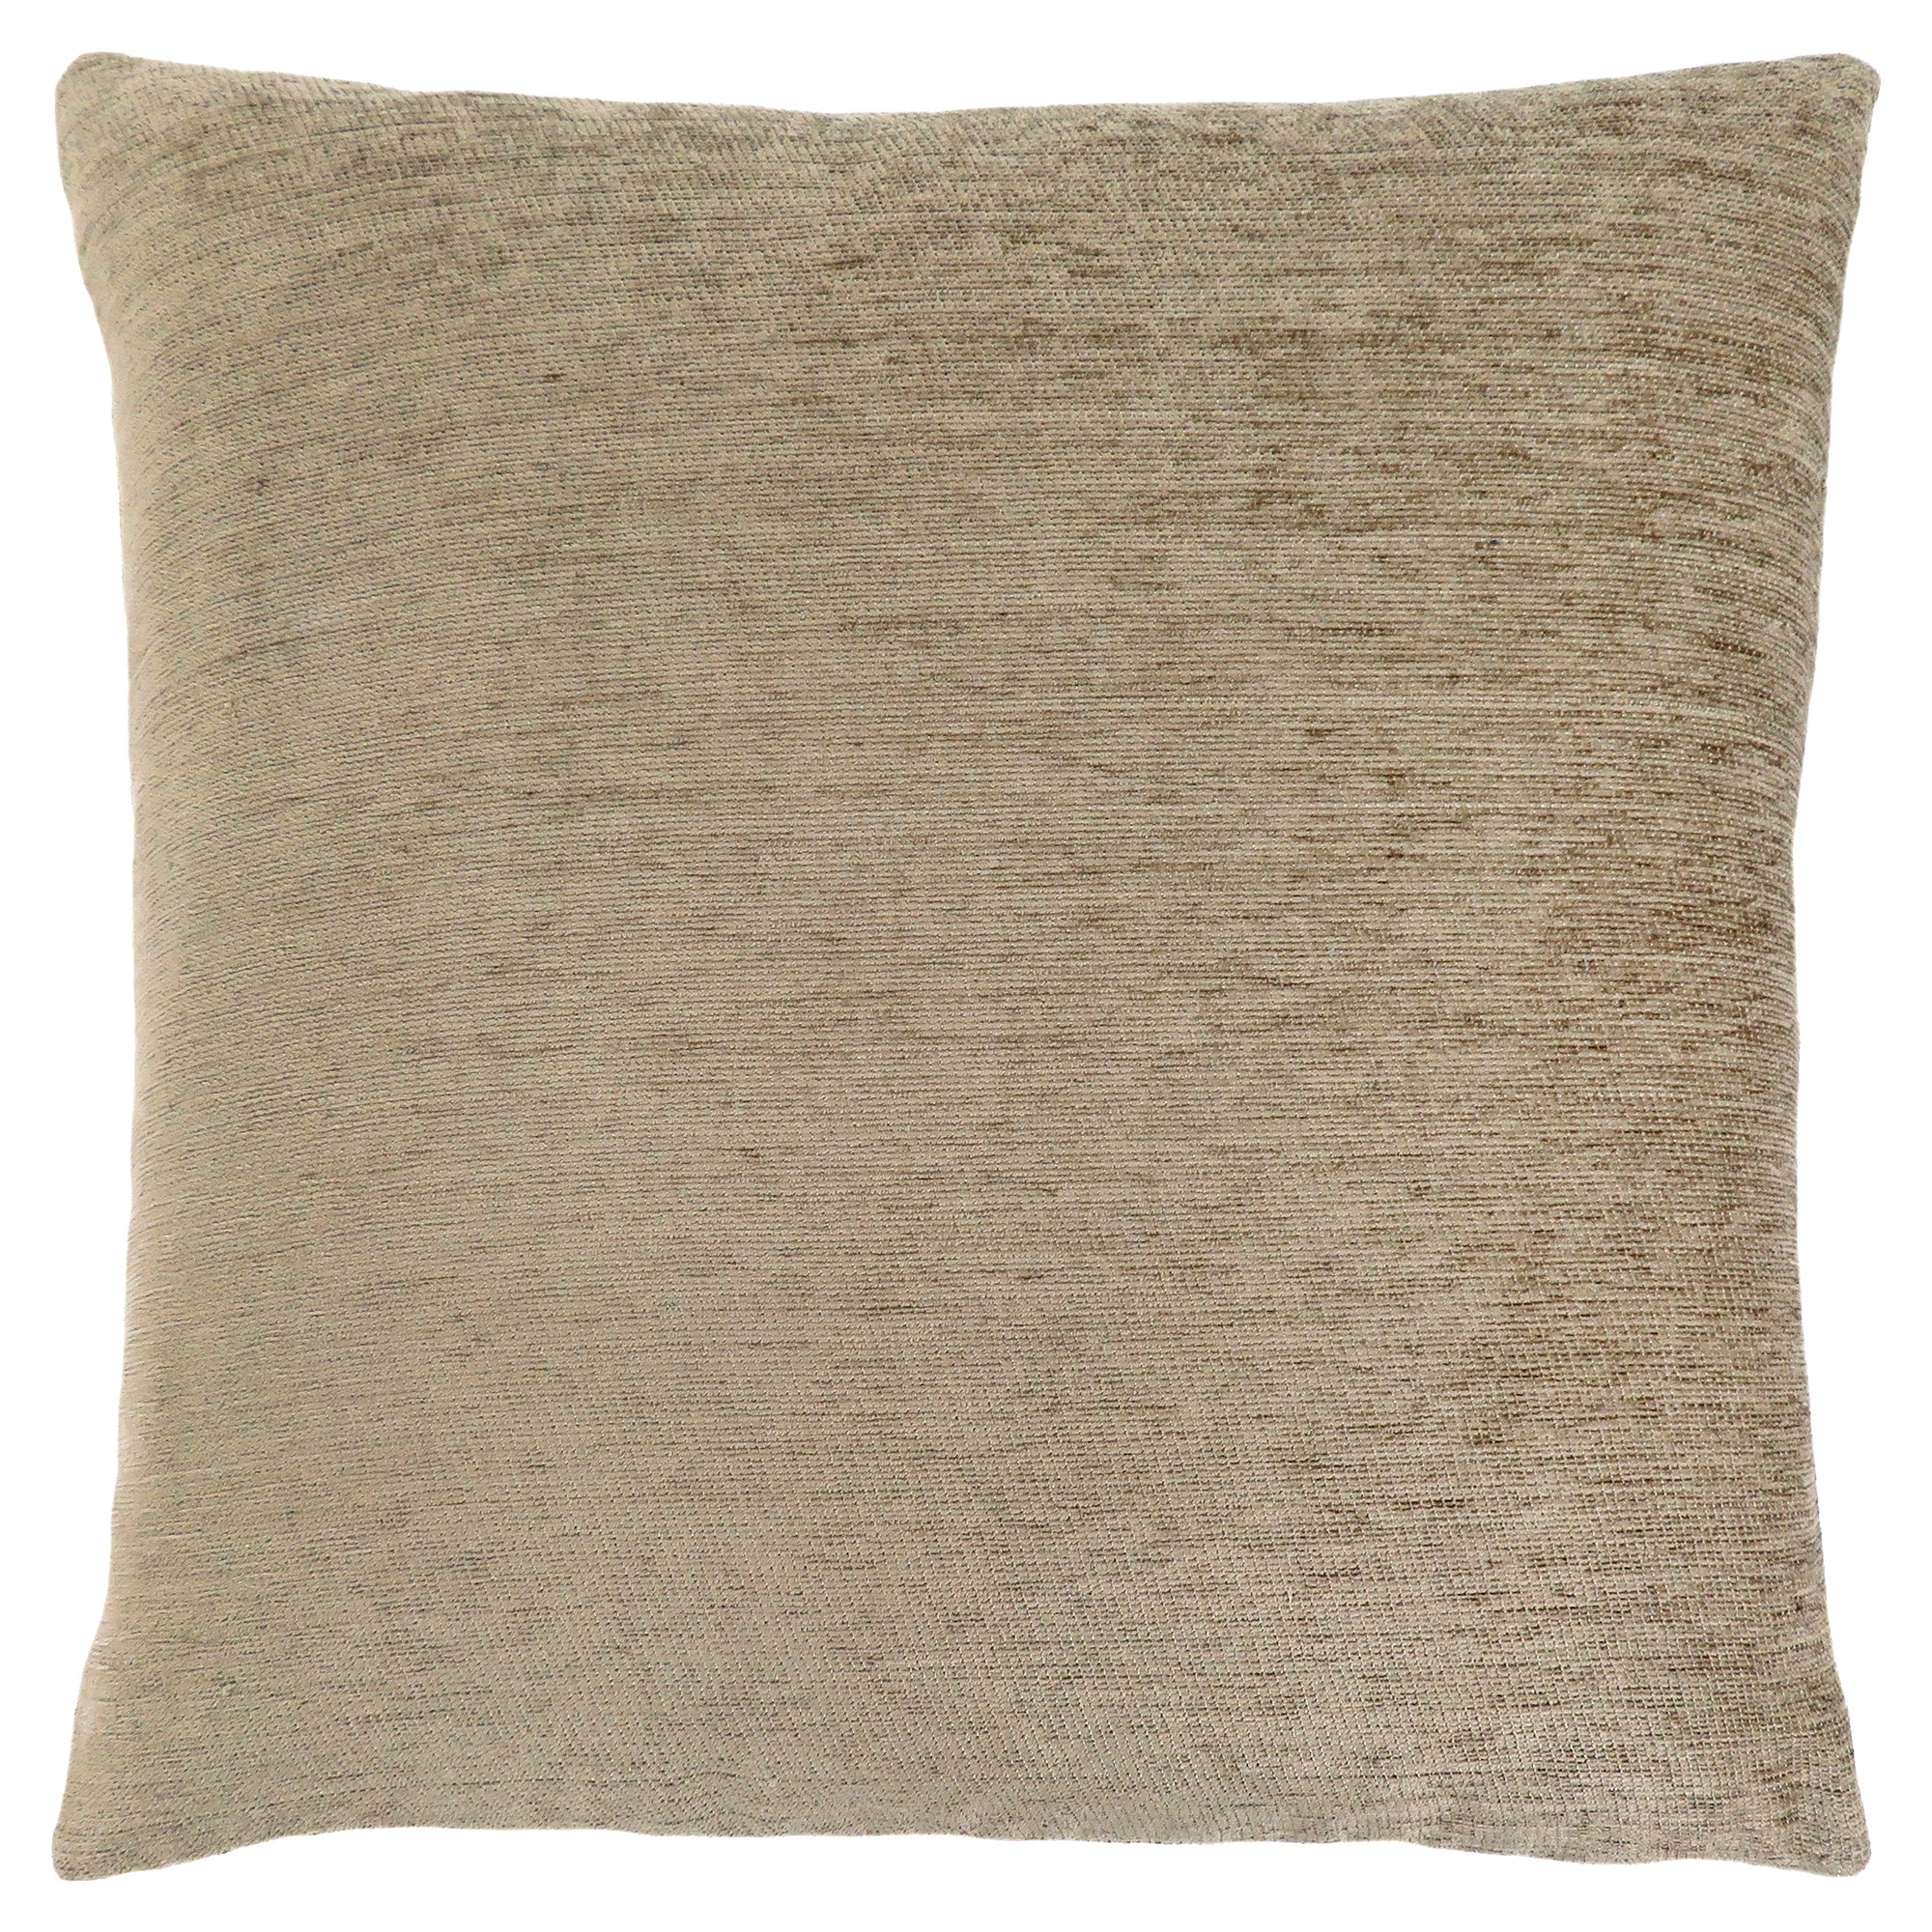 PILLOW - 18"X 18" / SOLID TAN / 1PC